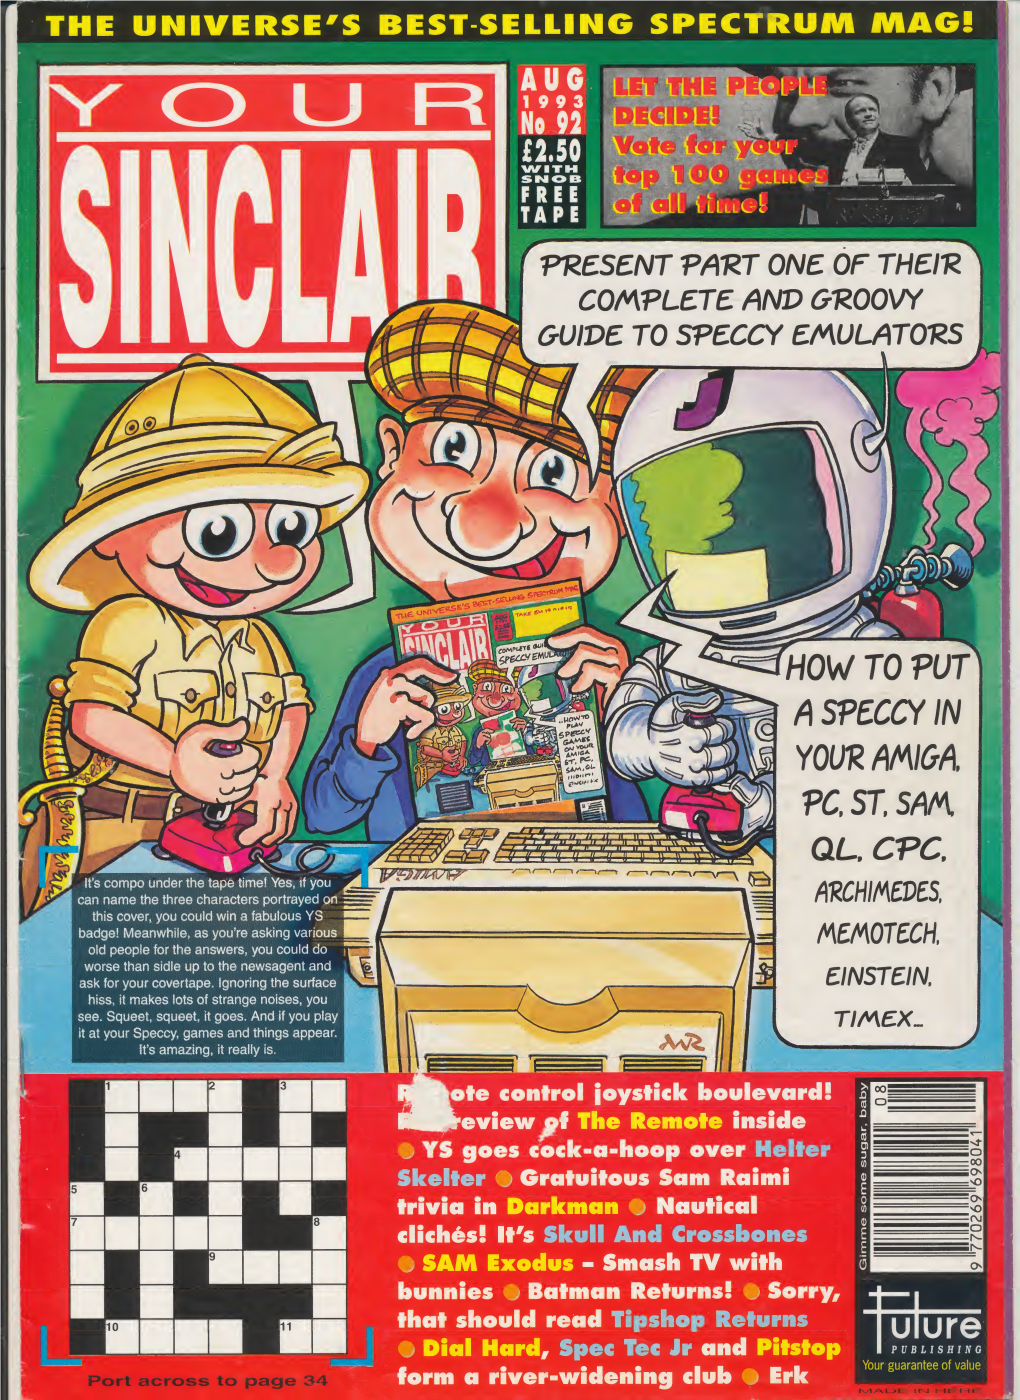 YOUR SINCLAIR August 1993 3 the Room, Something New Has Been Added, Fun